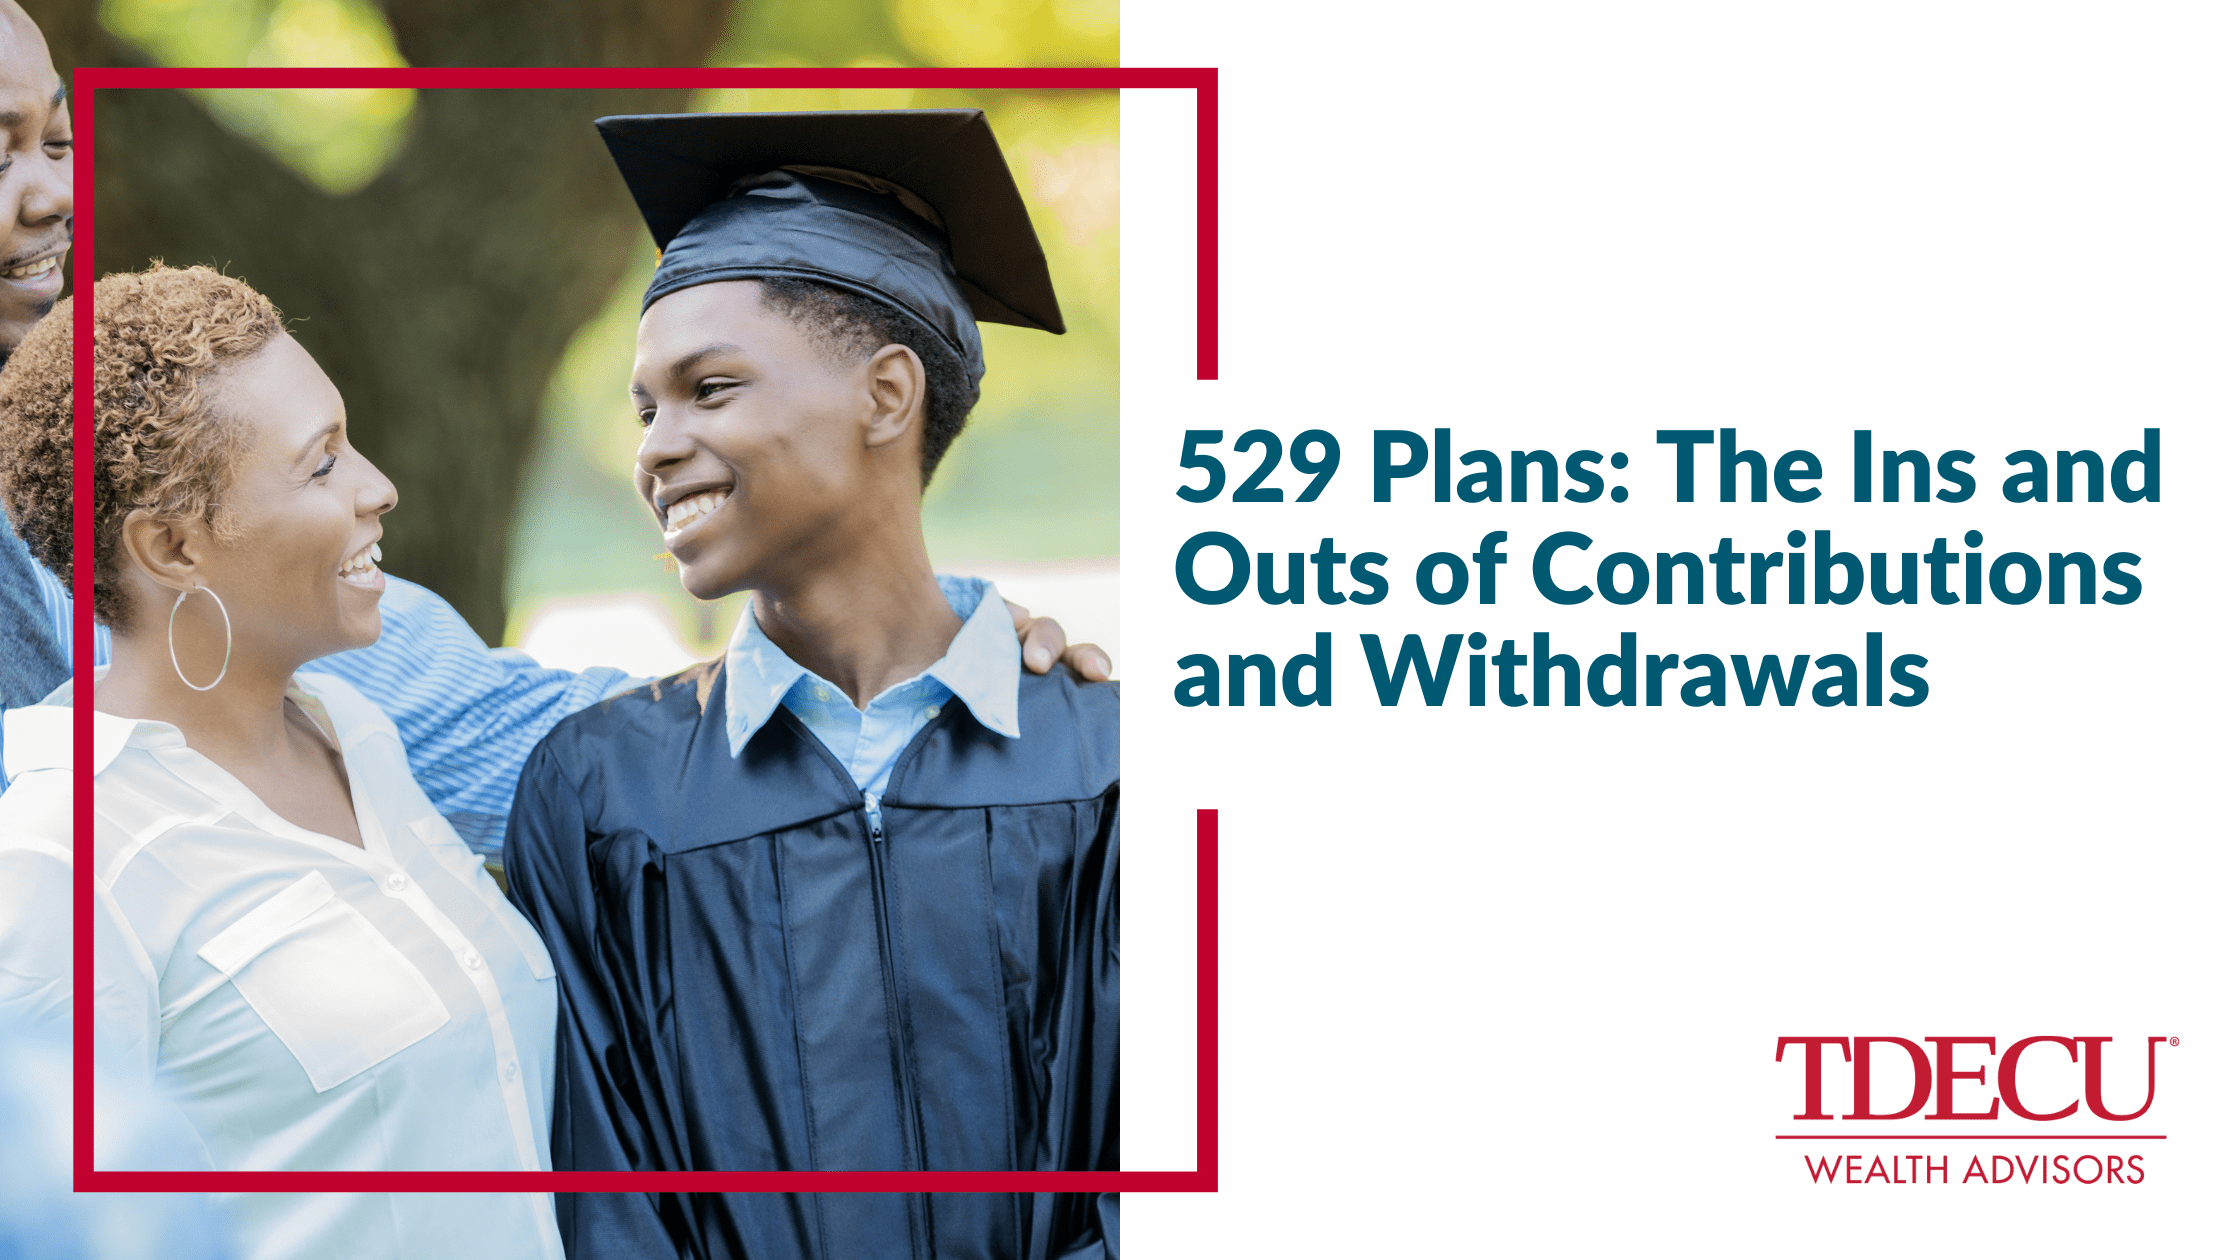 529 Plans: The Ins and Outs of Contributions and Withdrawals